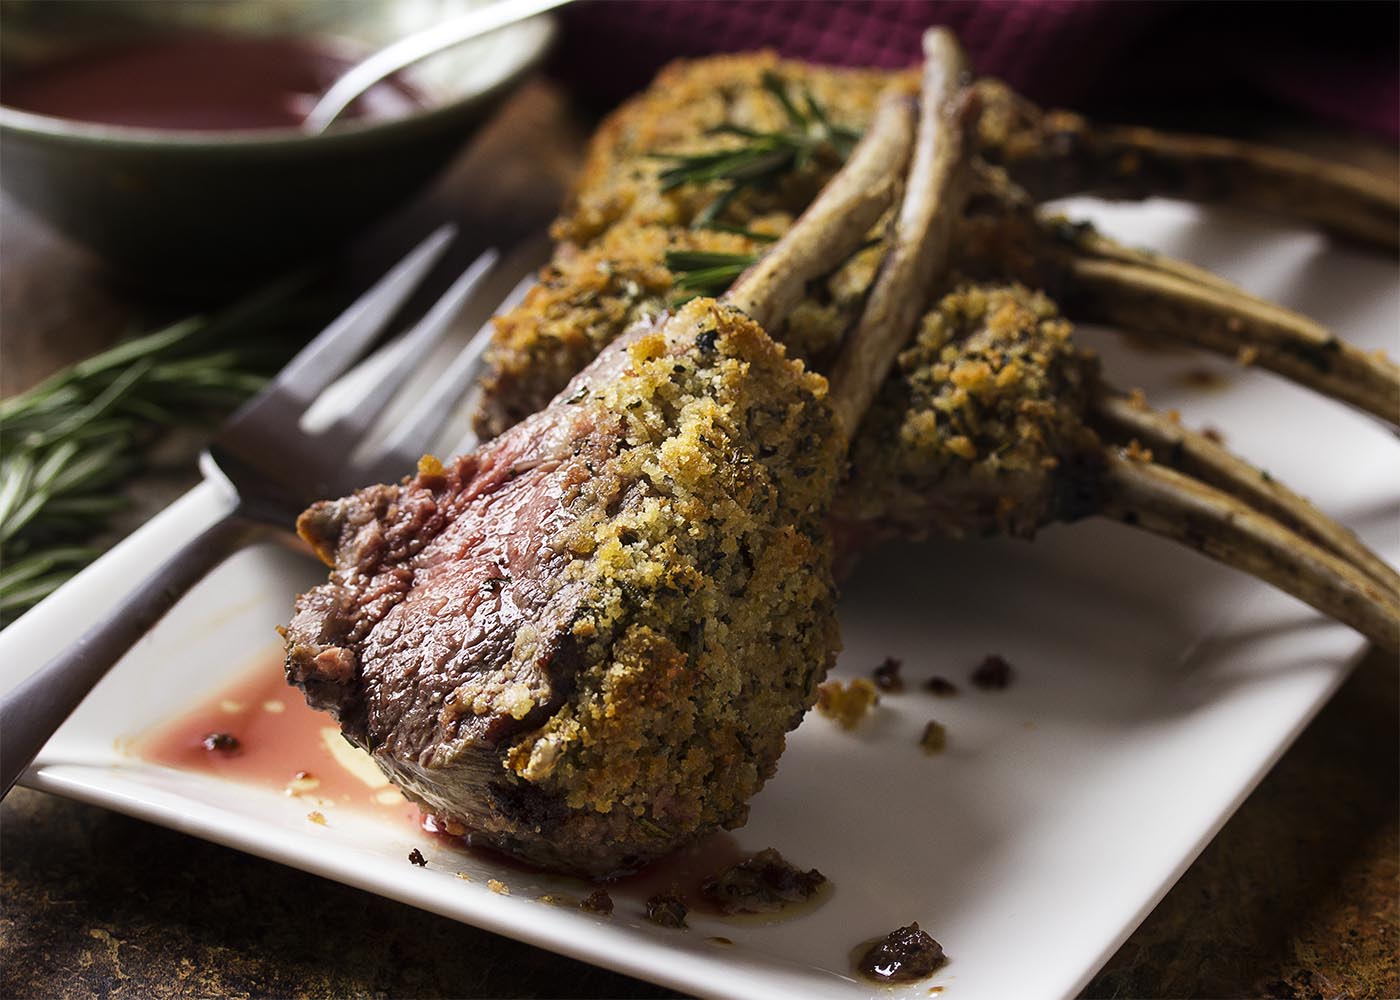 For the best herb crusted rack of lamb, marinate it overnight, cover in breadcrumbs, oven roast, and pair it with with a silky red wine sauce. This elegant recipe is perfect for the holidays or for a dinner party any time of the year. | justalittlebitofbacon.com